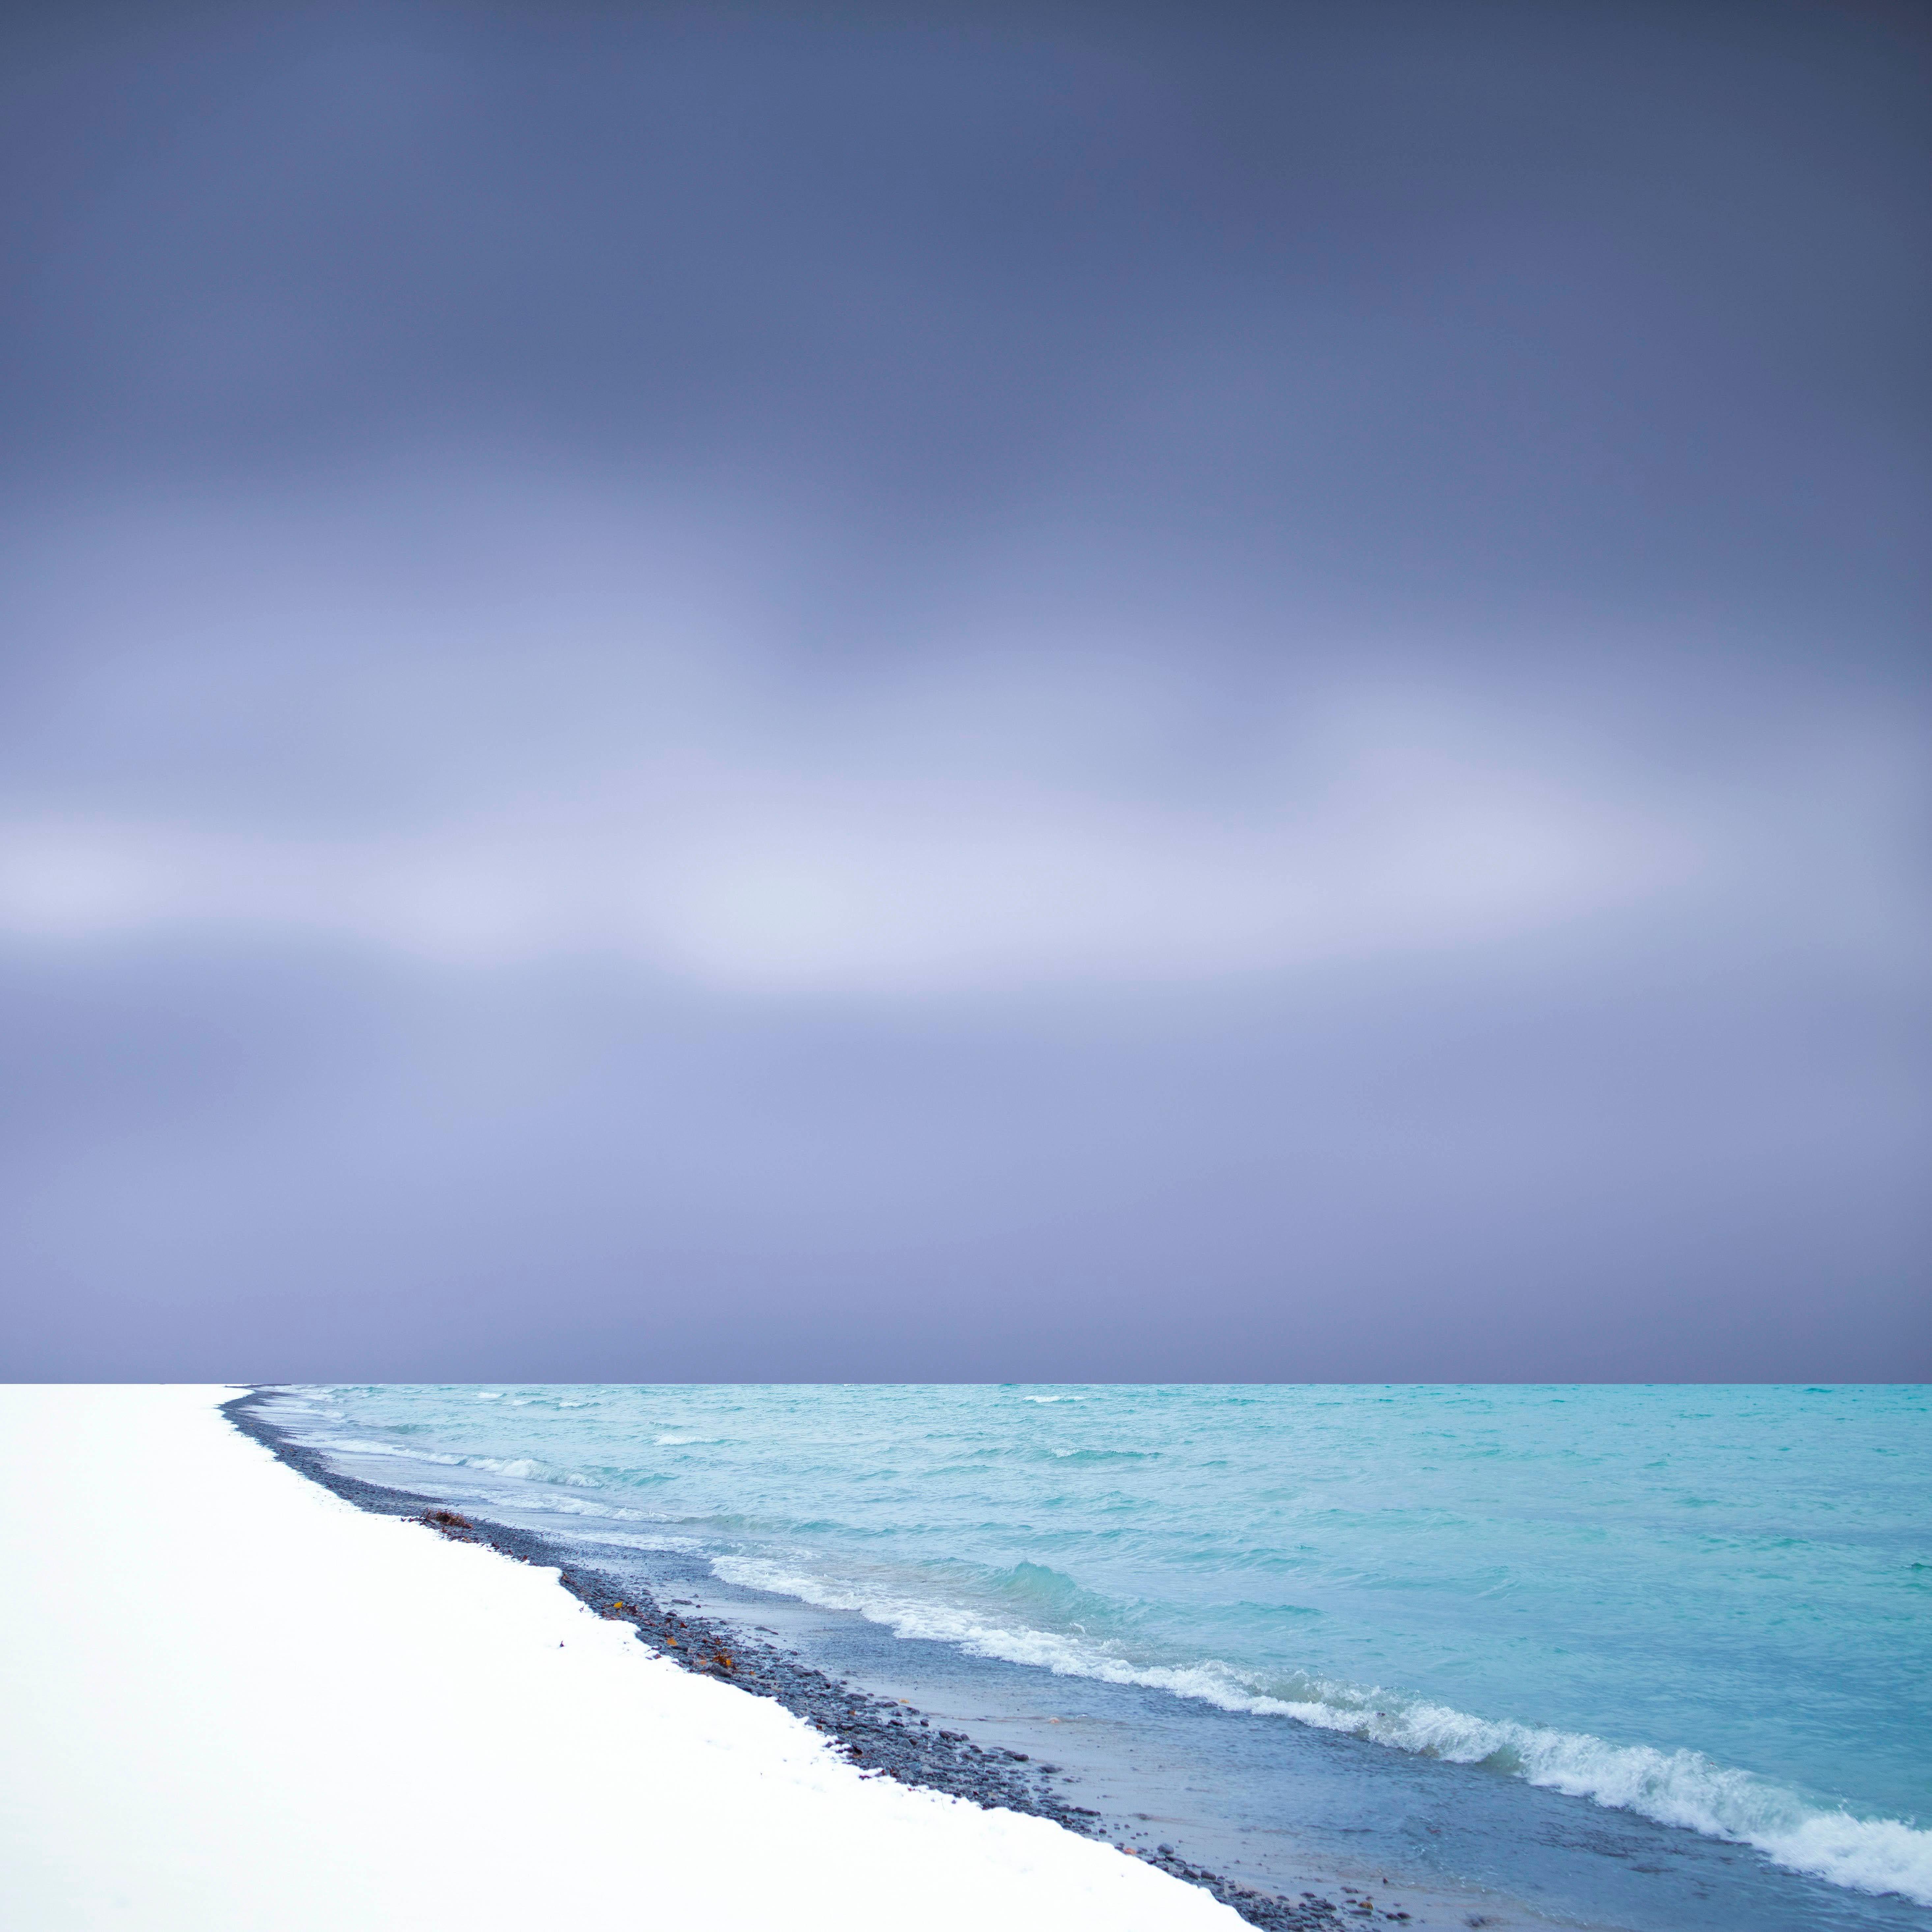 Lakeshore - white, blue, beach, abstract, manipulated, photograph on dibond